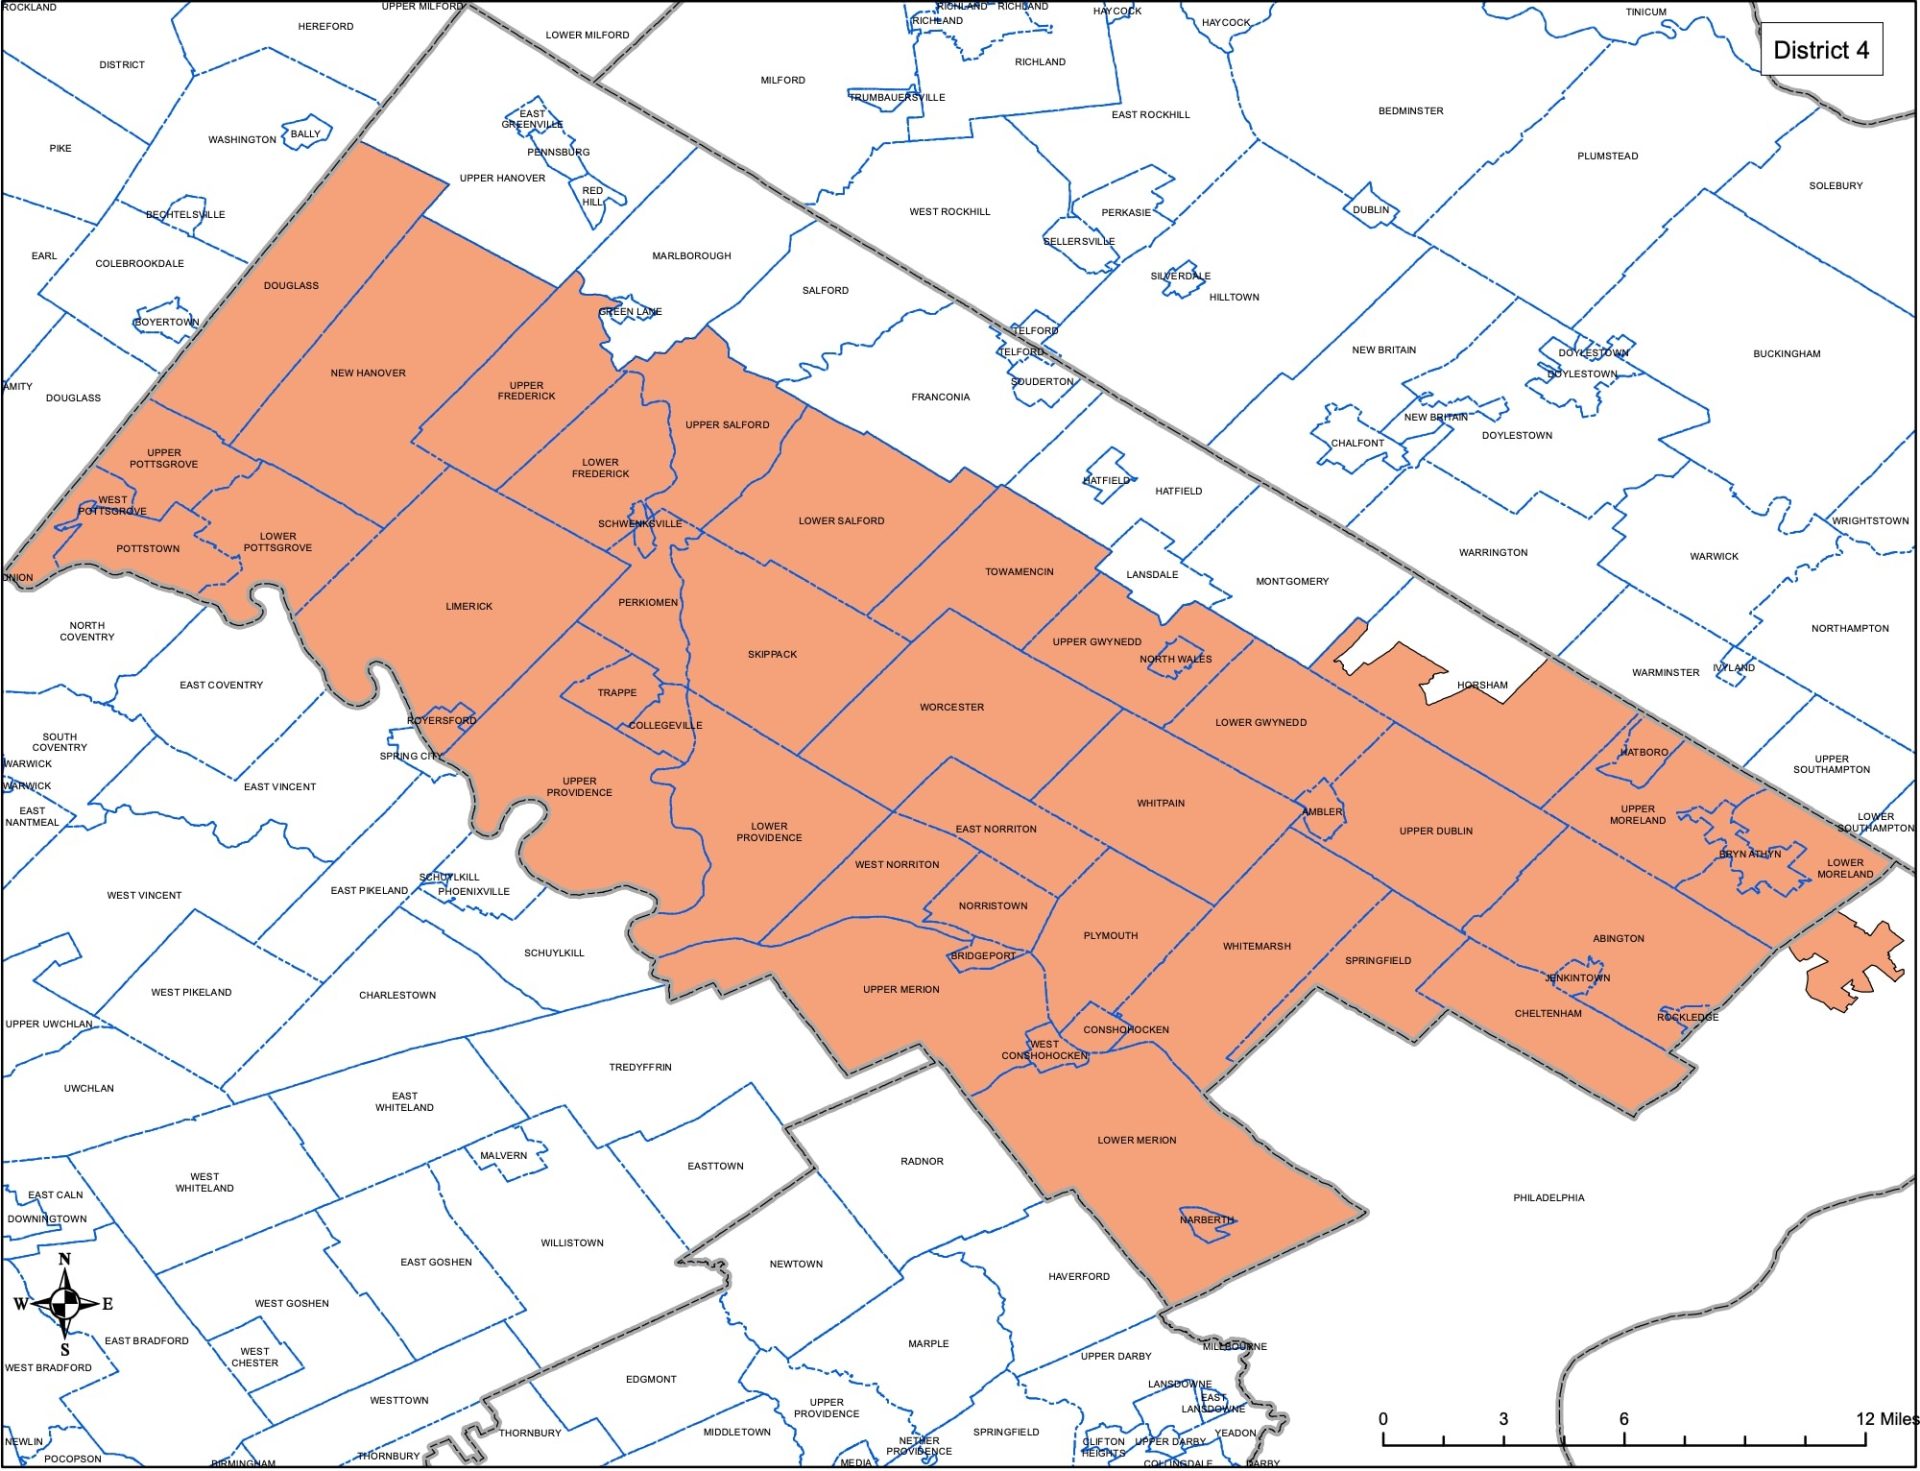 Proposed District 4 meets the standard for contiguity, as no section is detached.